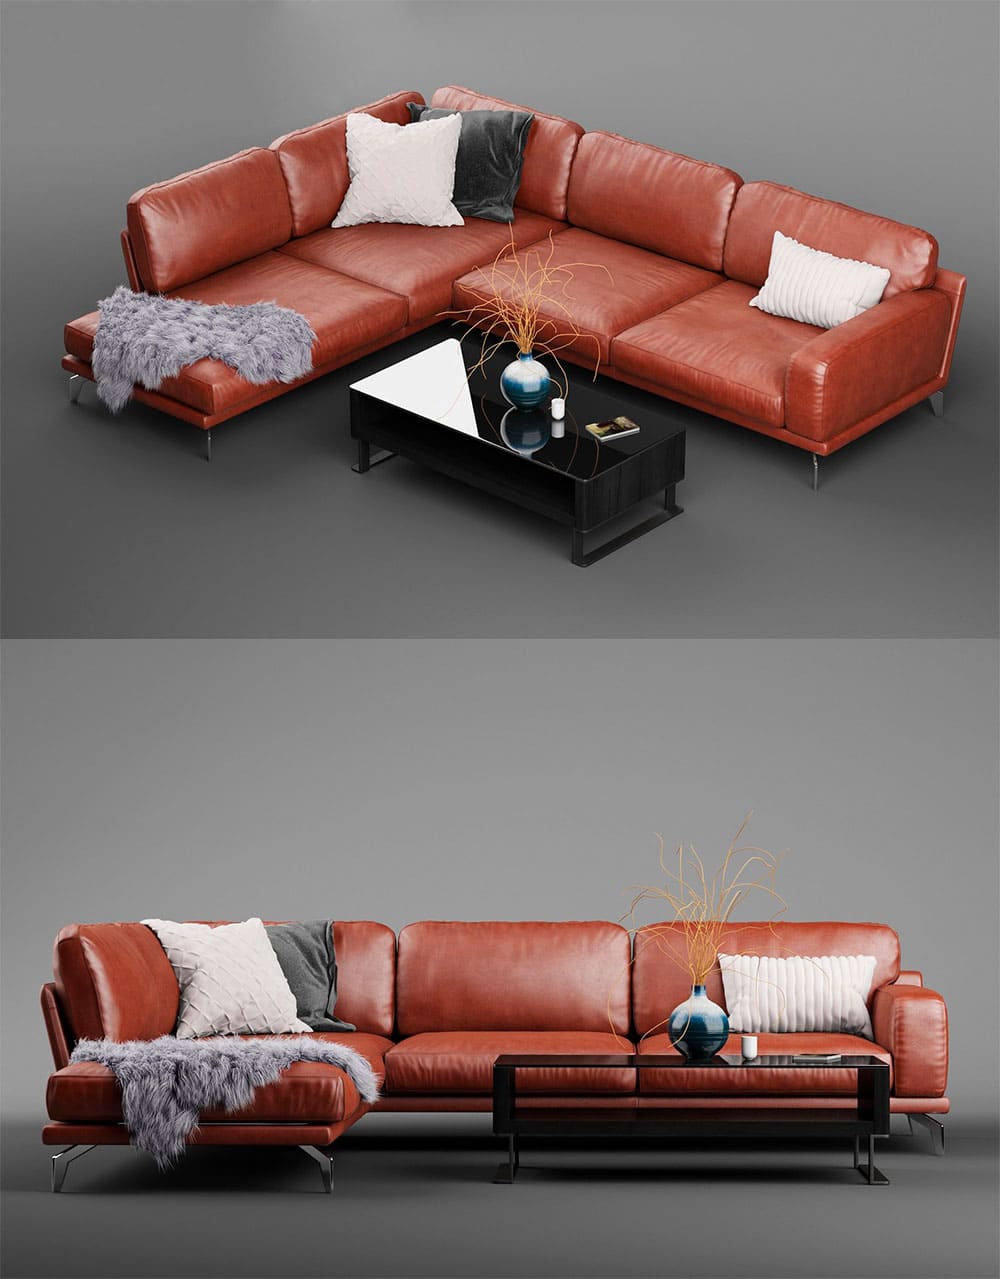 Peruna leather modular sectional sof, picture for pinterest.